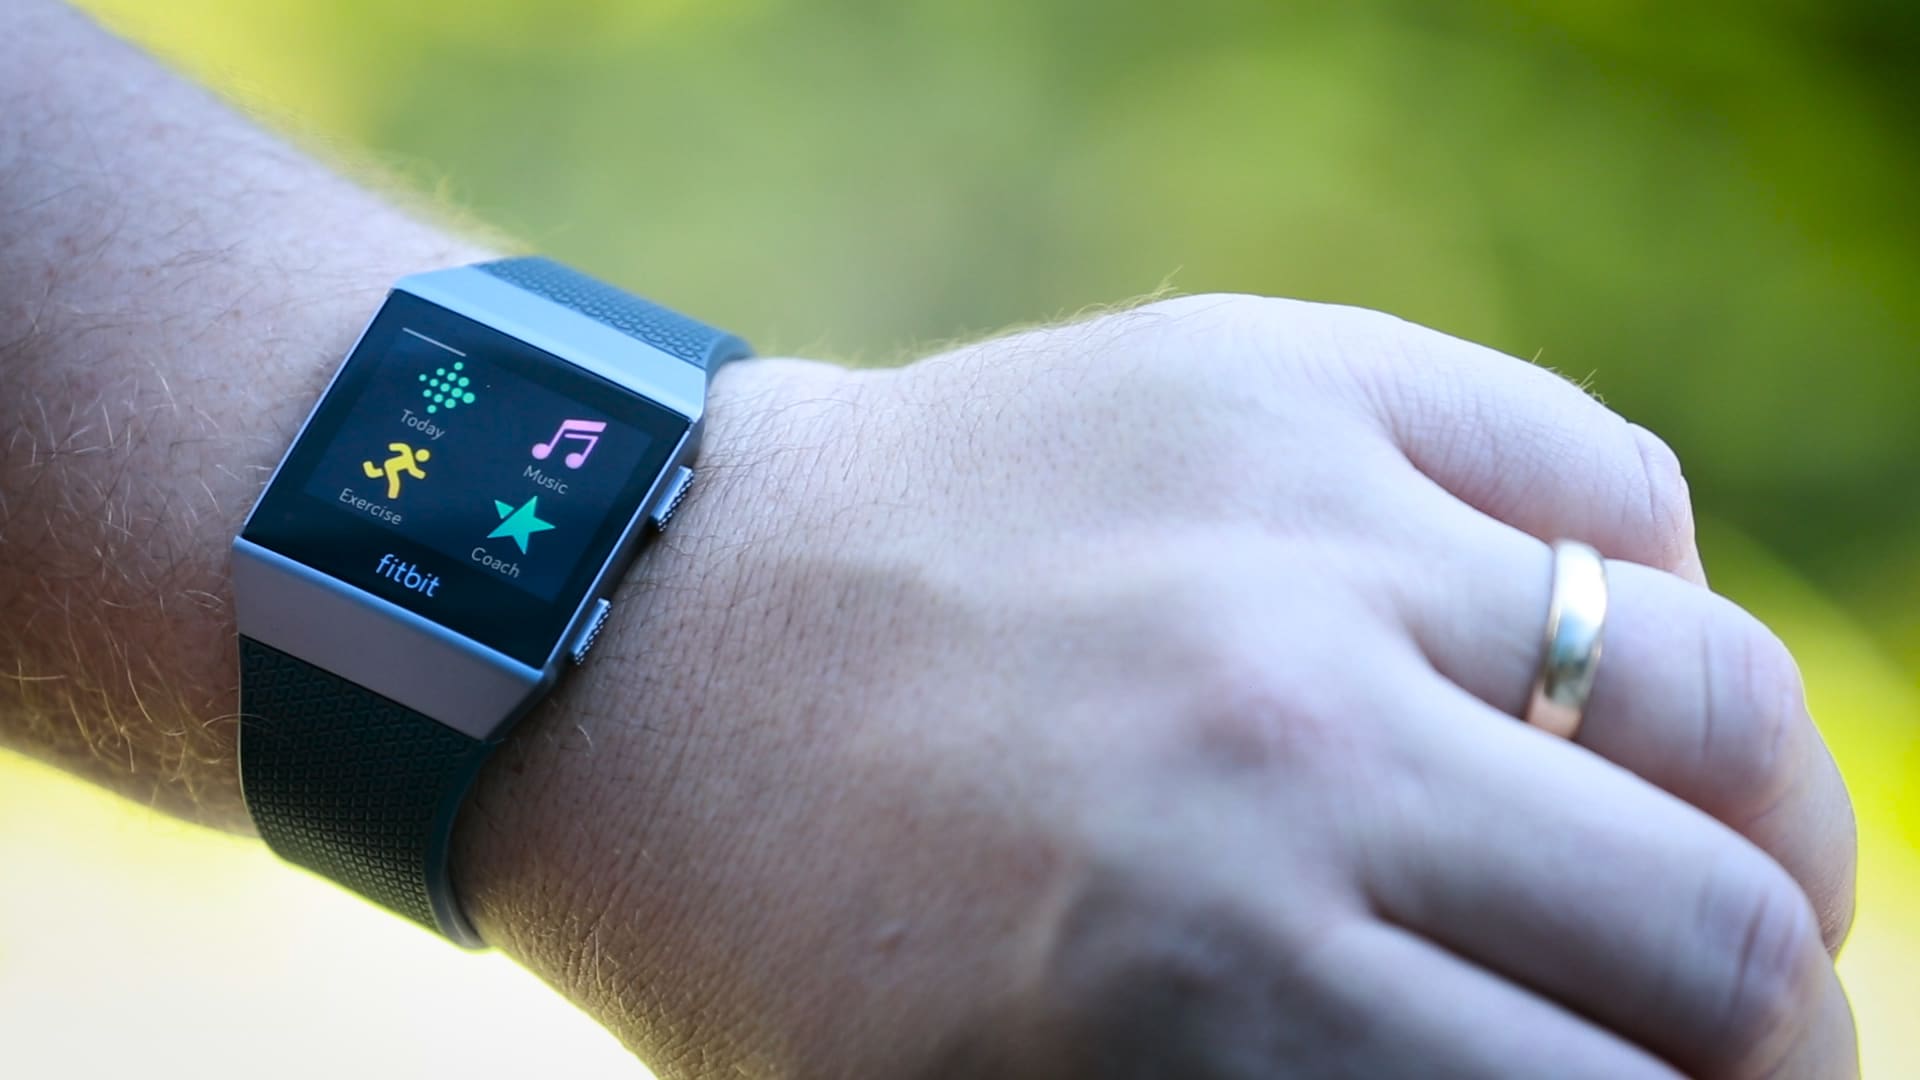 Apple Pay rival Fitbit Pay launches in UK, is available with fintech Starling